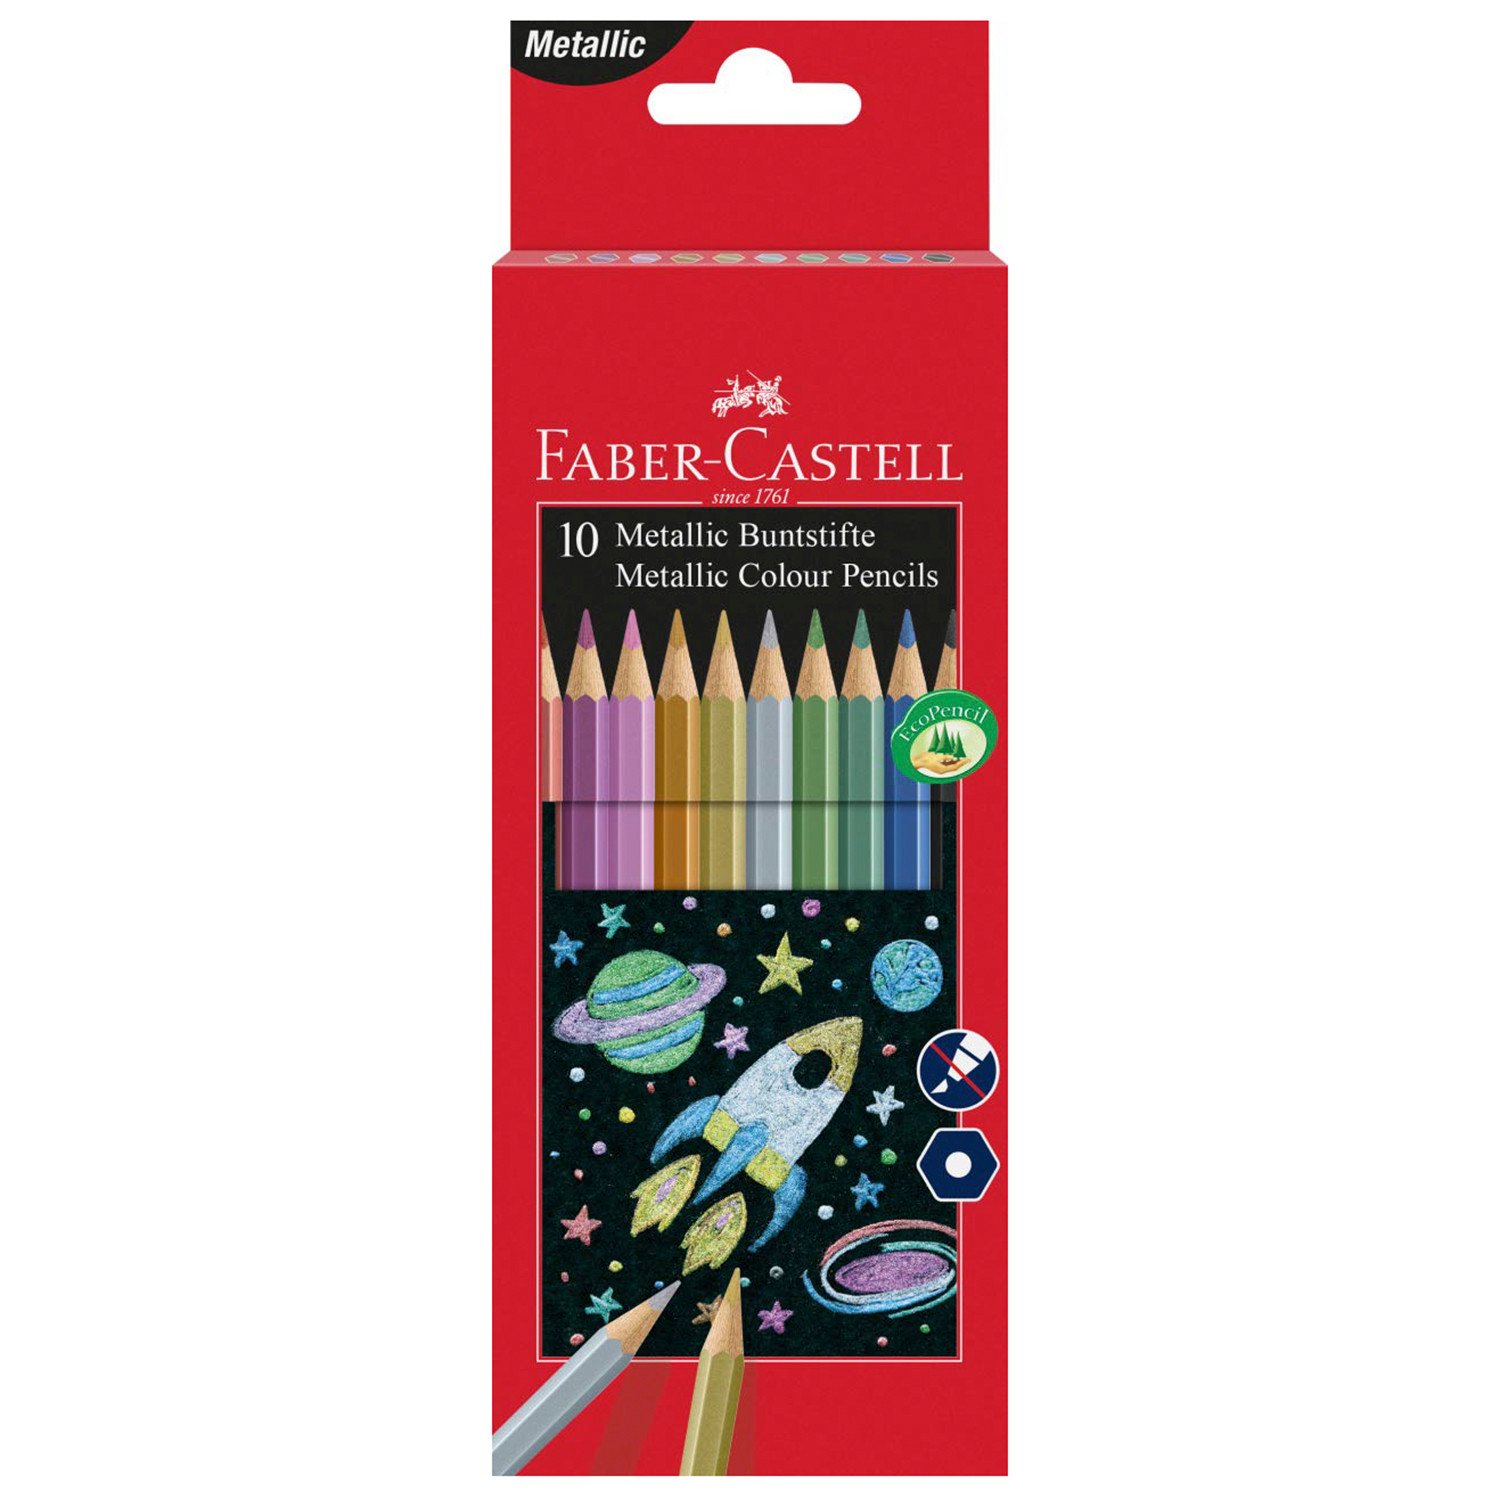 Faber-Castell Metallic Colouring Pencils 10 Pack Image